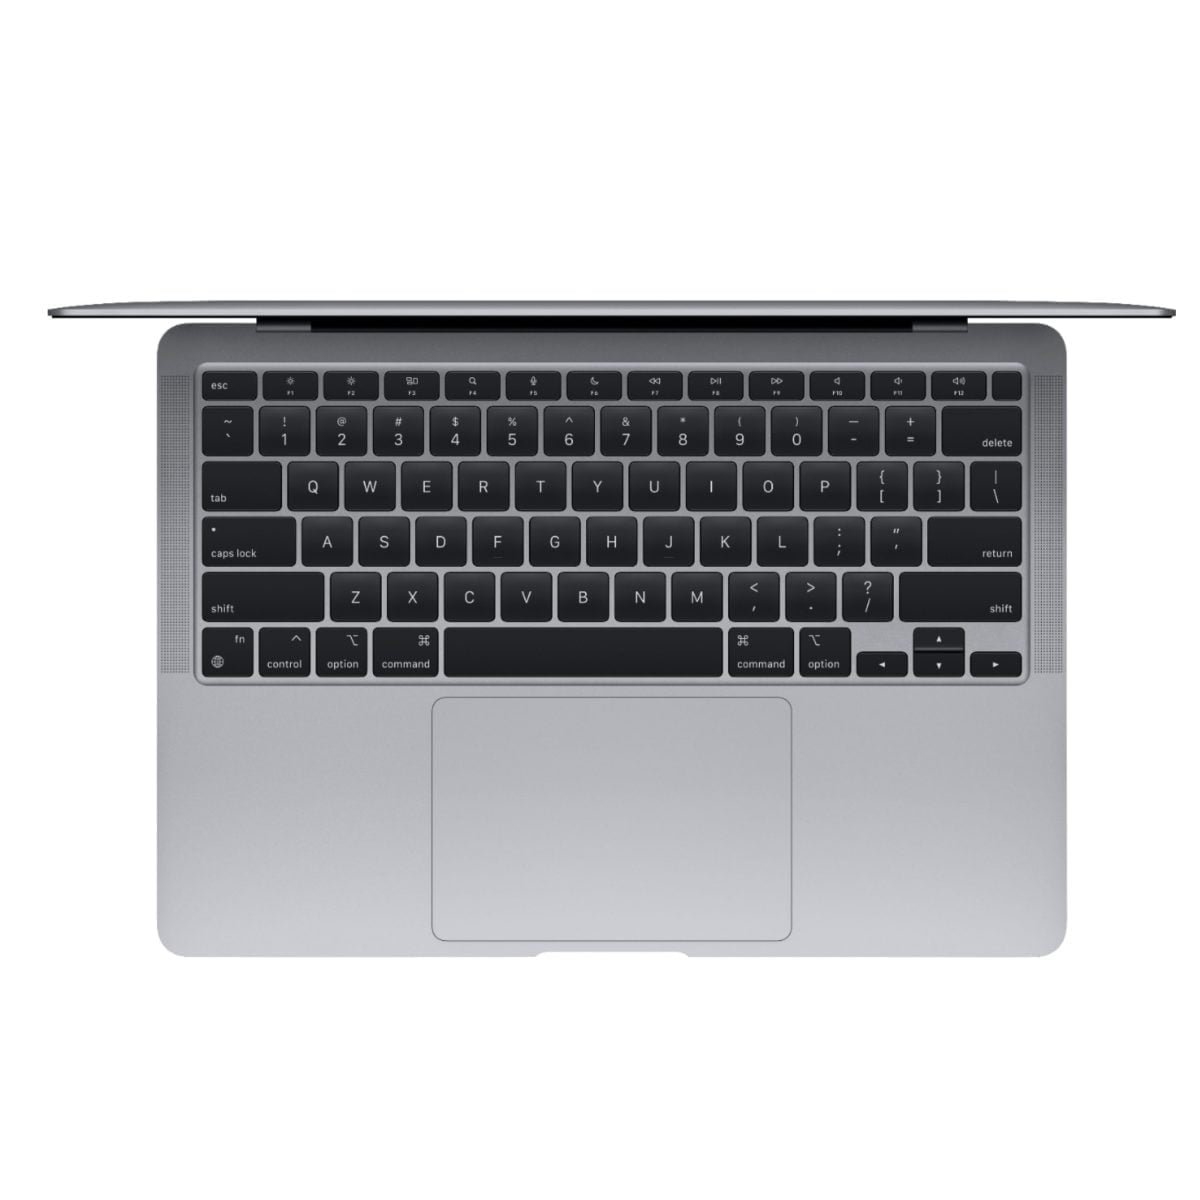 5721600Cv11D Scaled Apple &Lt;H1 Class=&Quot;Heading-5 V-Fw-Regular&Quot;&Gt;Macbook Air 13&Quot; Laptop - Apple M1 Chip - 8Gb Memory - 512Gb Ssd (Latest Model) - Space Gray (English Keyboard)&Lt;/H1&Gt; Https://Www.youtube.com/Watch?V=Hs1Hols4Sd0 &Lt;Span Class=&Quot;Product-Data-Label Body-Copy&Quot;&Gt;&Lt;Strong&Gt;Model&Lt;/Strong&Gt;:&Lt;/Span&Gt;&Lt;Span Class=&Quot;Product-Data-Value Body-Copy&Quot;&Gt;Mgn73, &Lt;/Span&Gt;Apple Macbook Air 13  Thinnest And Lightest Notebook Gets Supercharged With The Apple M1 Chip. Tackle Your Projects With The Blazing-Fast 8-Core Cpu. Take Graphics-Intensive Apps And Games To The Next Level With The 8-Core Gpu. And Accelerate Machine Learning Tasks With The 16-Core Neural Engine. All With A Silent, Fanless Design And The Longest Battery Life Ever — Up To 18 Hours.¹ Macbook Air. Still Perfectly Portable. Just A Lot More Powerful. Macbook Air Macbook Air 13&Quot; Laptop - Apple M1 Chip - 8Gb Memory - 512Gb Ssd (Latest Model) - Space Gray